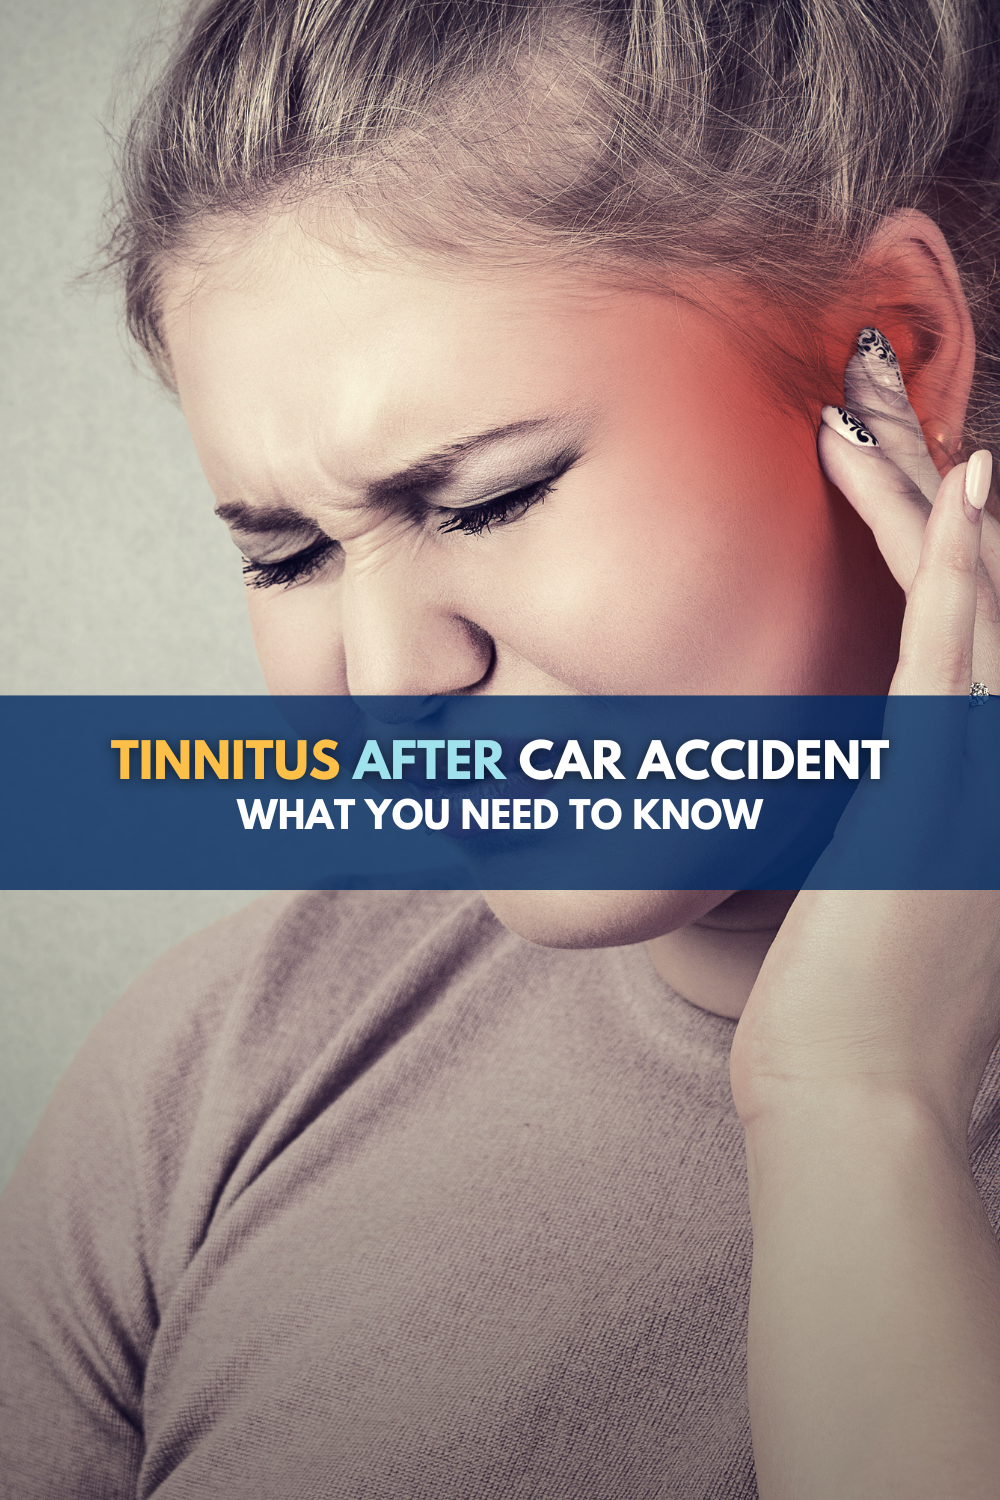 COVID-19, vaccinations, and tinnitus